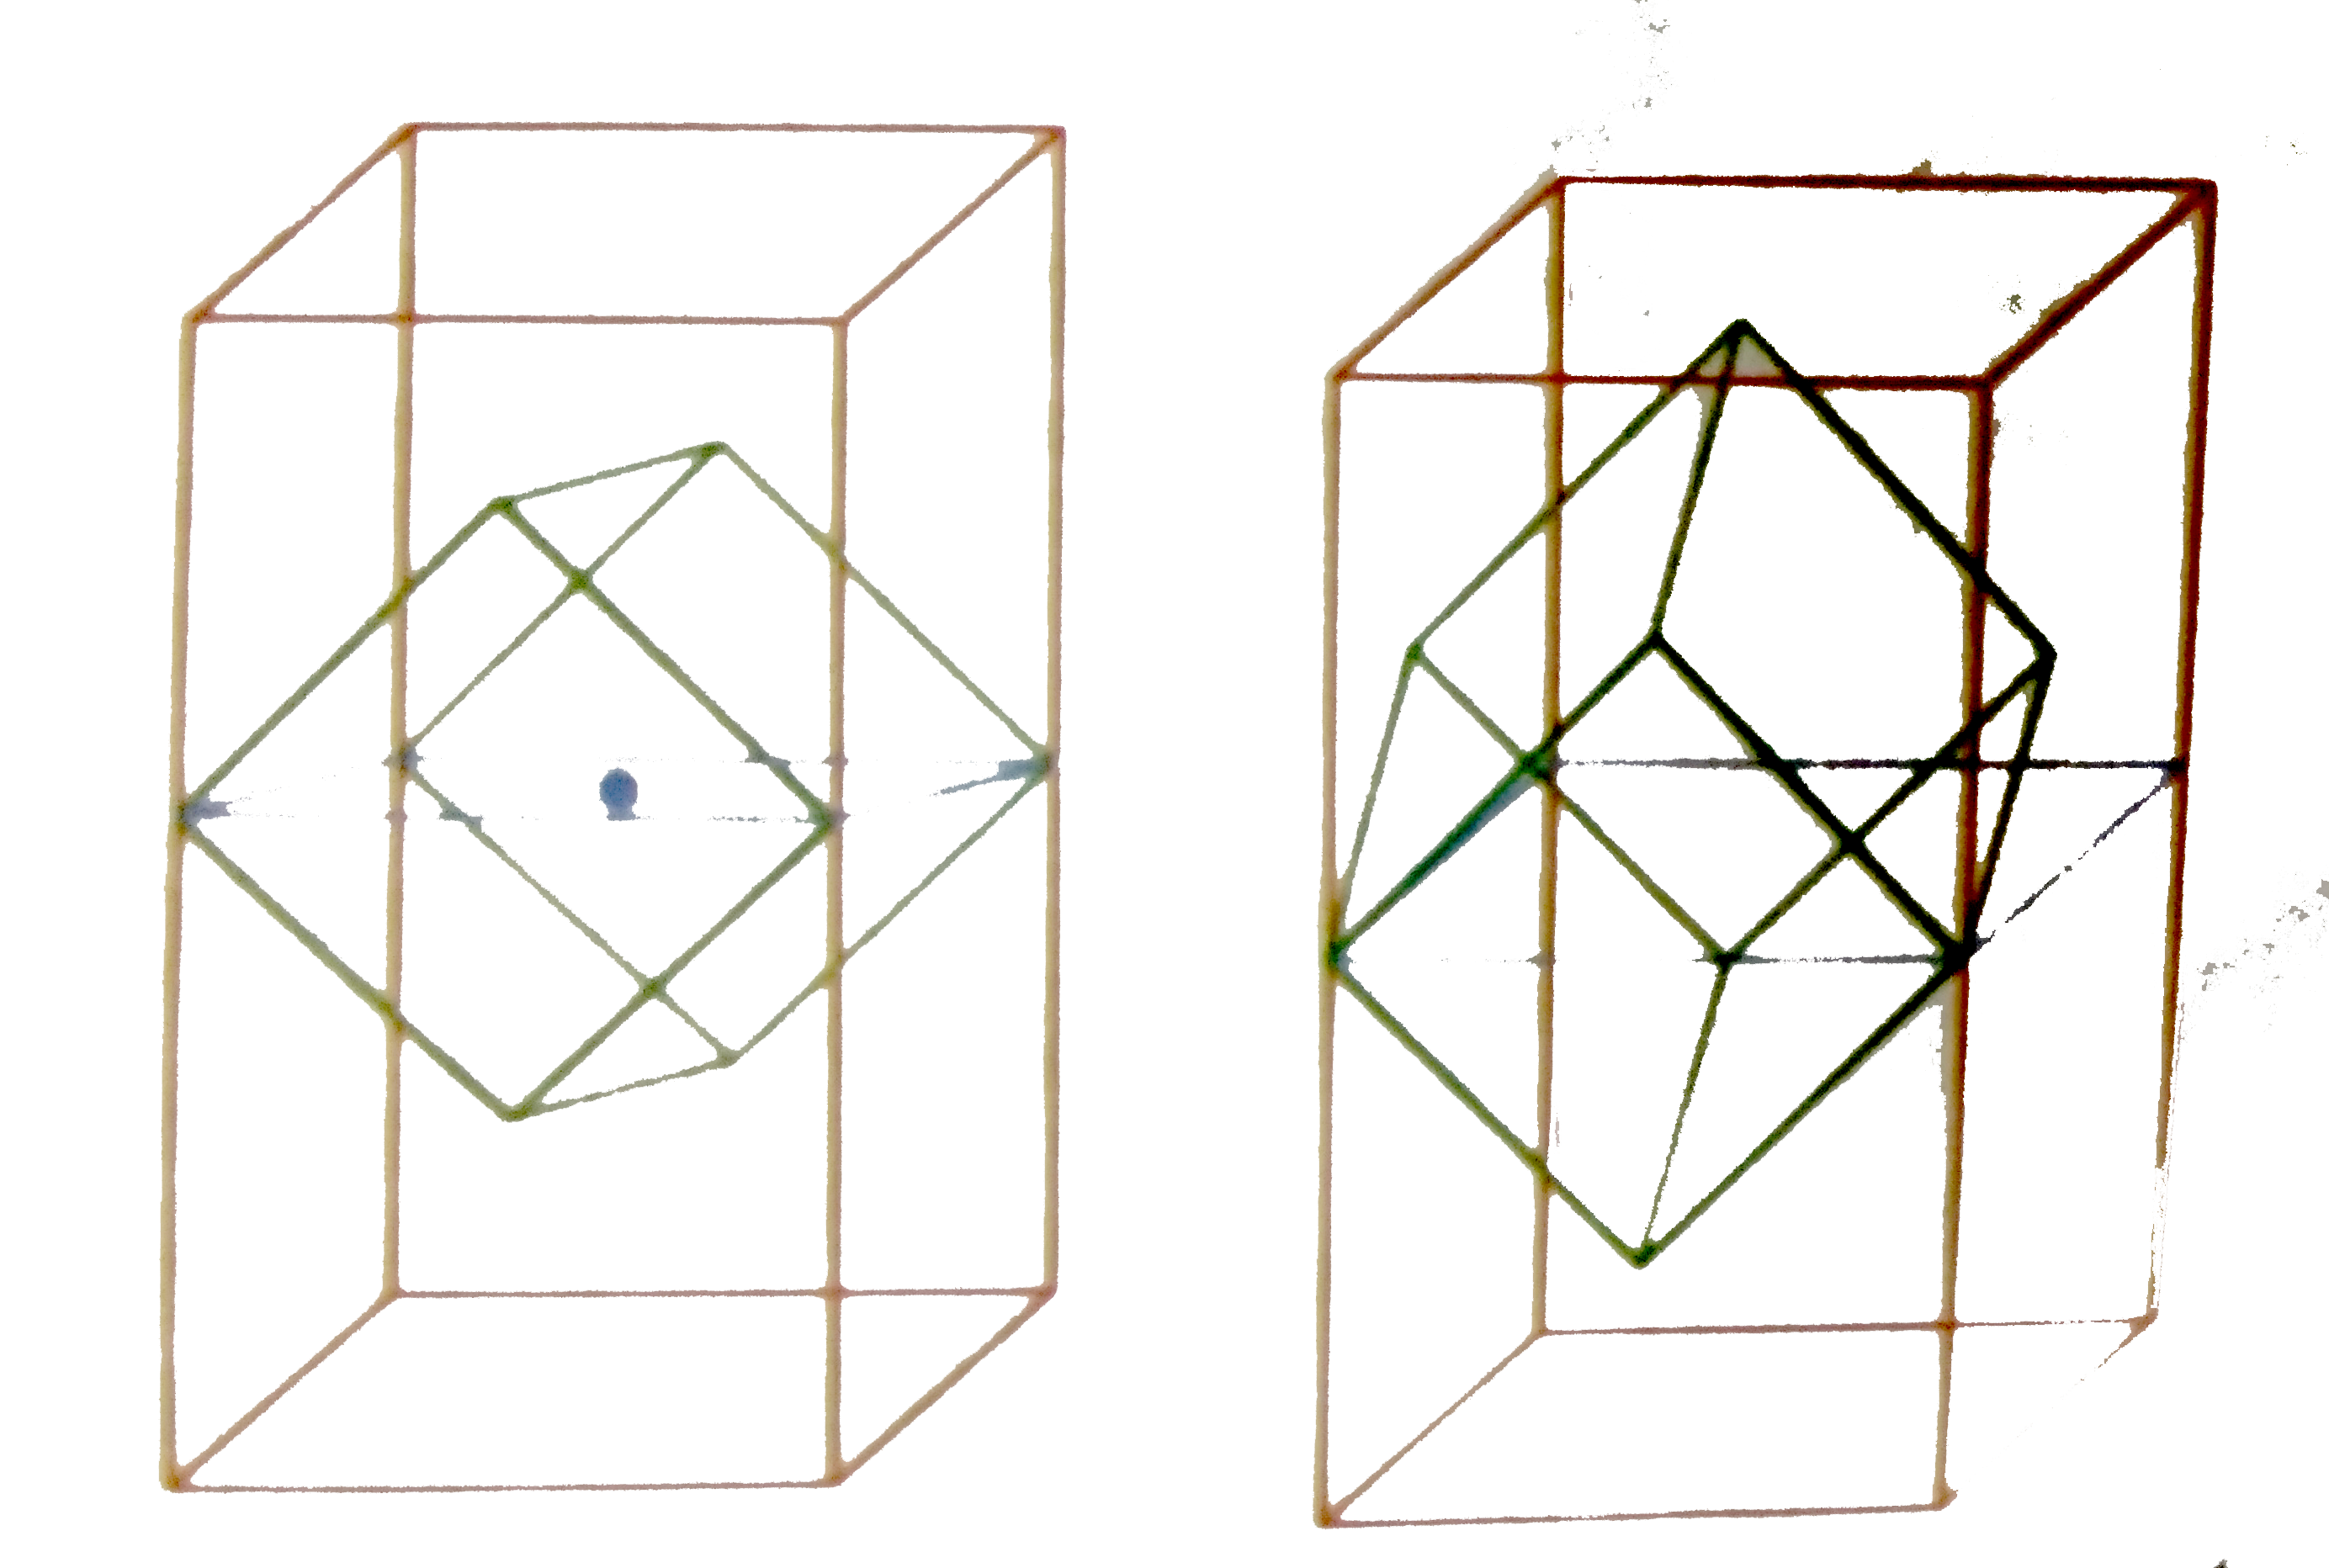 Face centered cubic lattice of NaCl may also smaller, tetragonal unit cell as shown below fig. (a,b)      The number of formula units of NaCl present in smaller unit cell drawn in (b) are